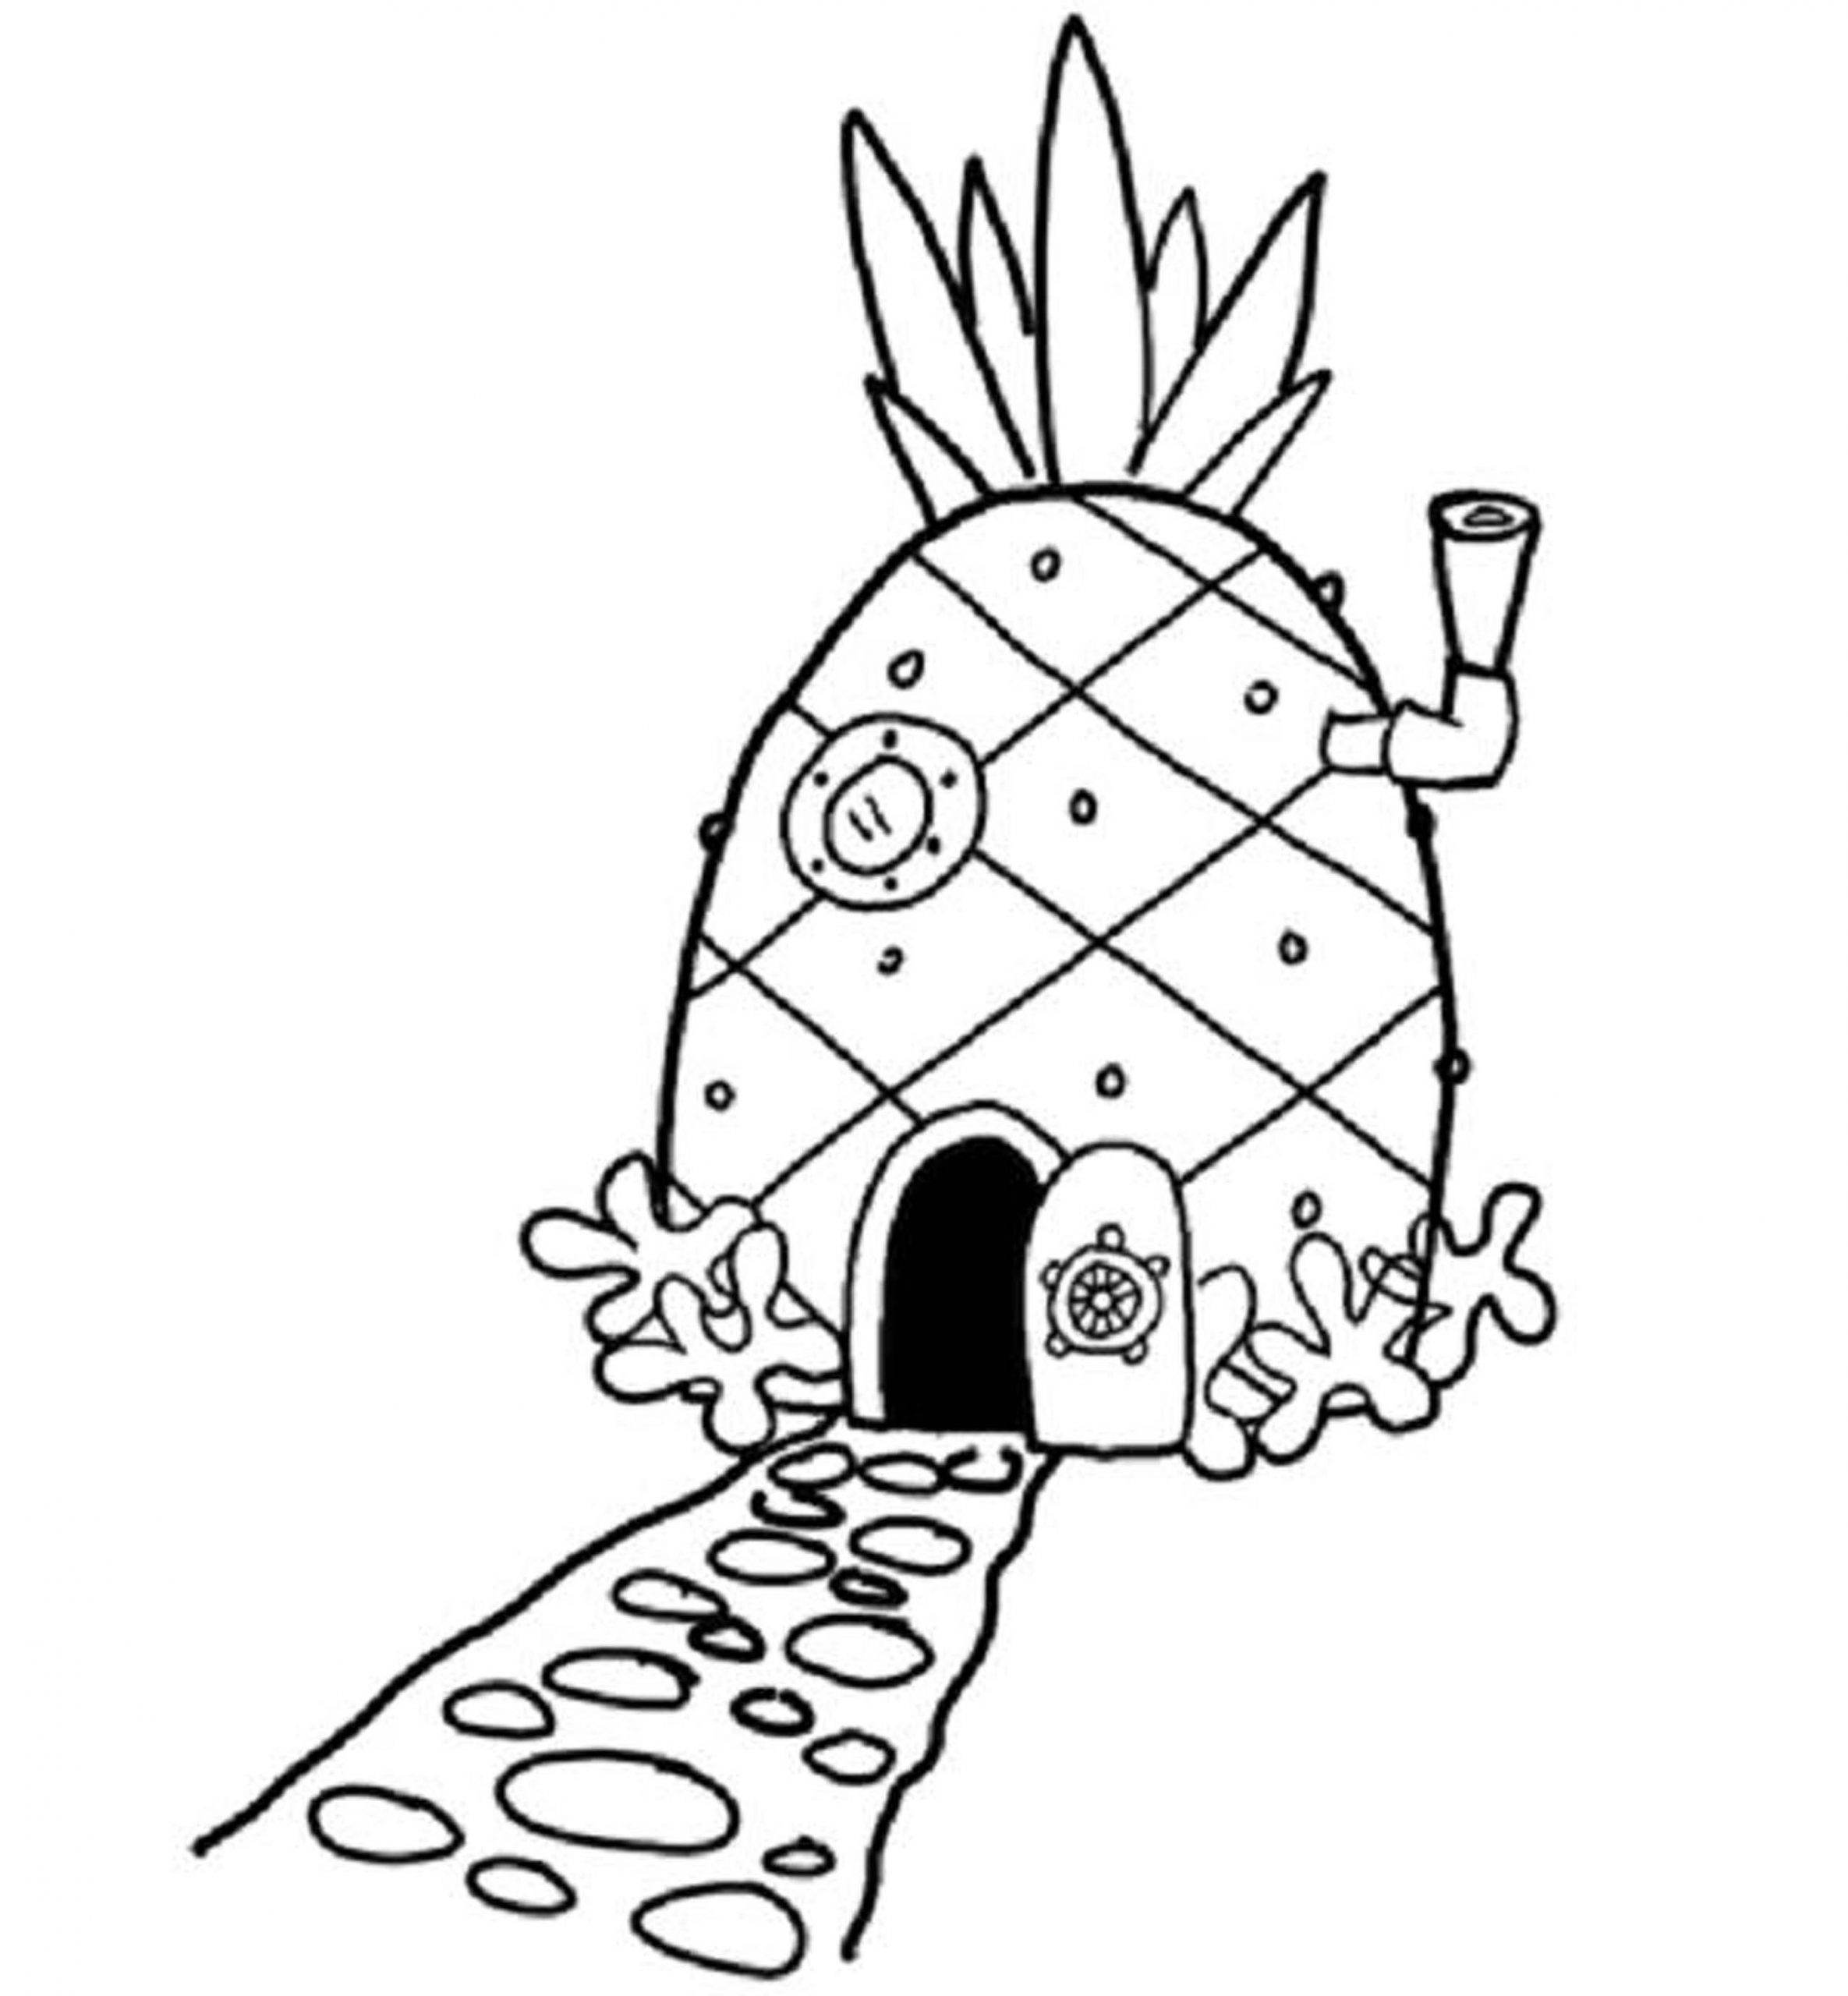 Spongebob House Coloring Page Amazing Pineapple Sheet Photo Ideas Print  Download Choosing Pages For Your ...